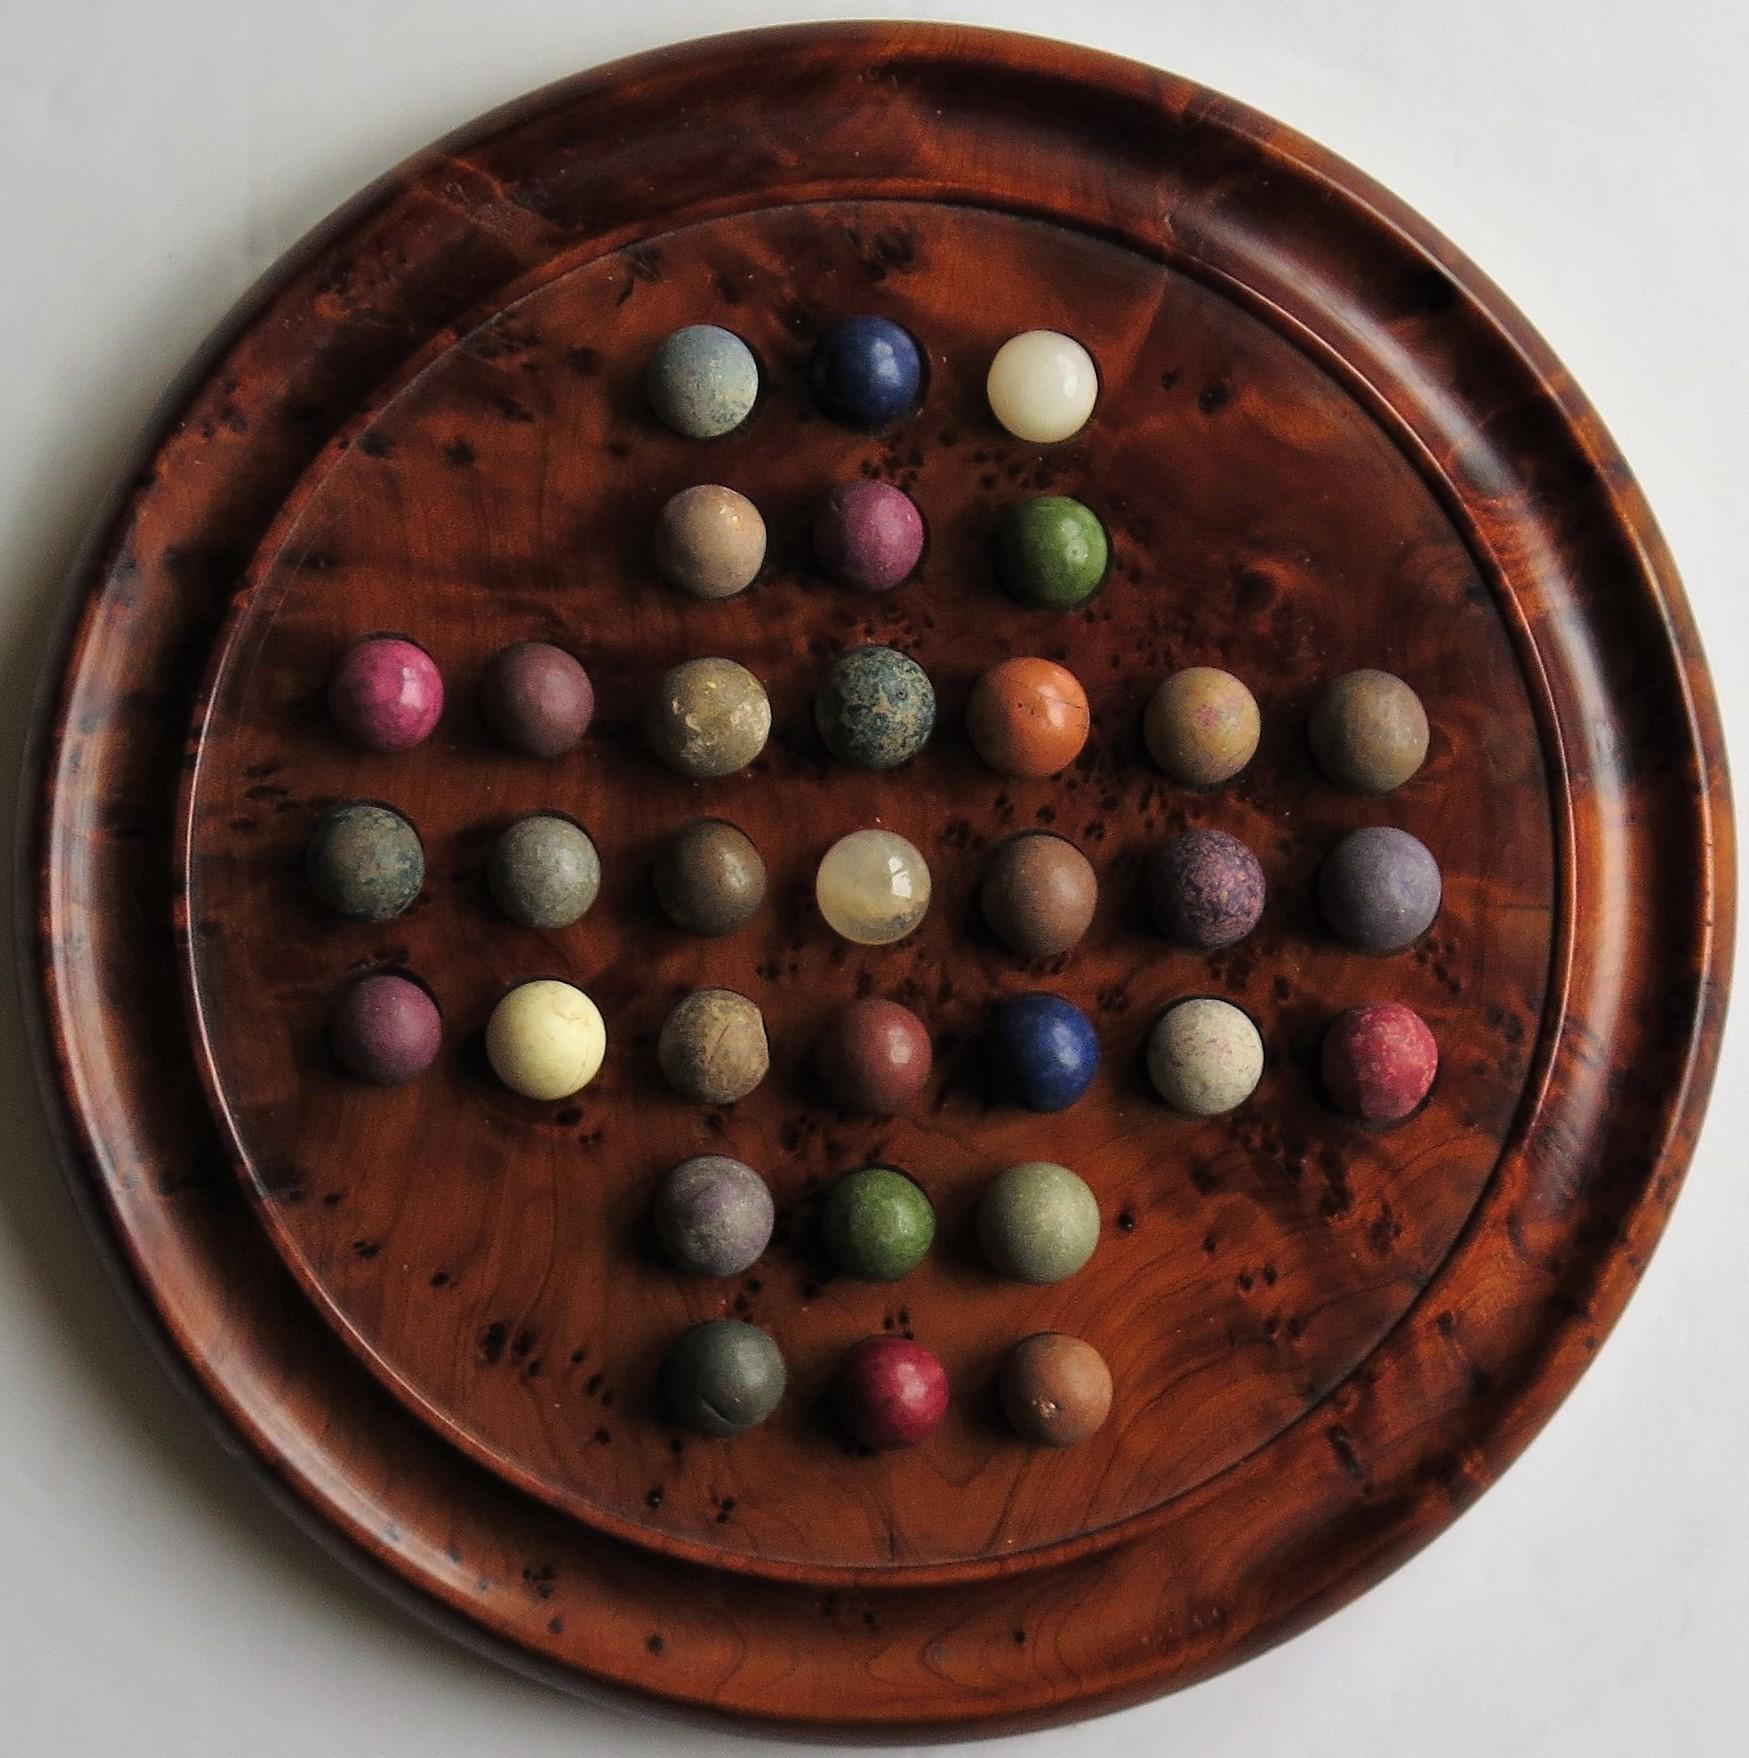 19th Century Marble Solitaire Board Game with 33 Early Handmade Stone Marbles, circa 1900